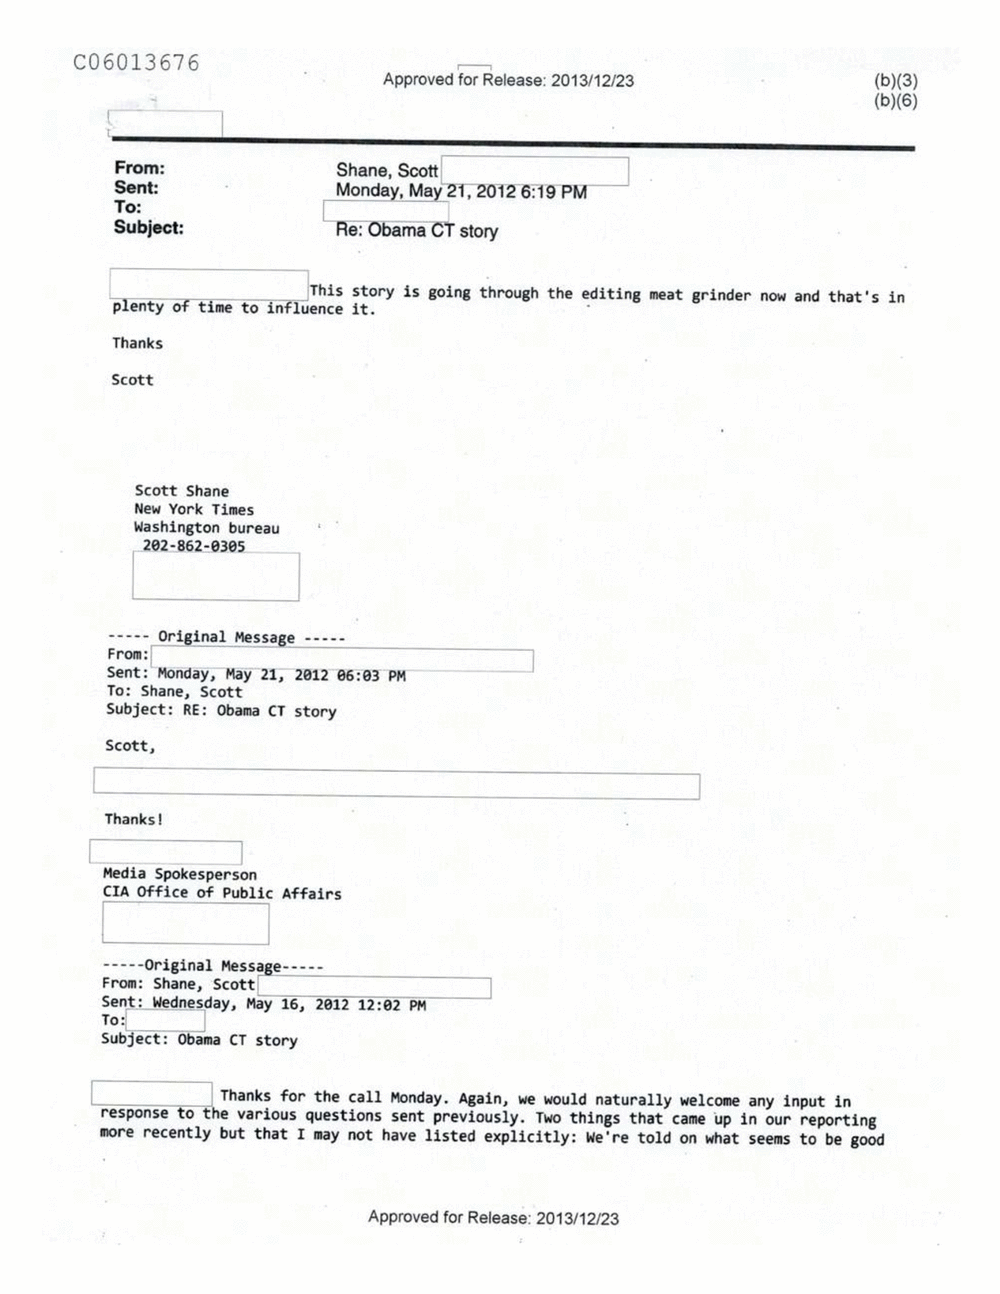 Page 530 from Email Correspondence Between Reporters and CIA Flacks